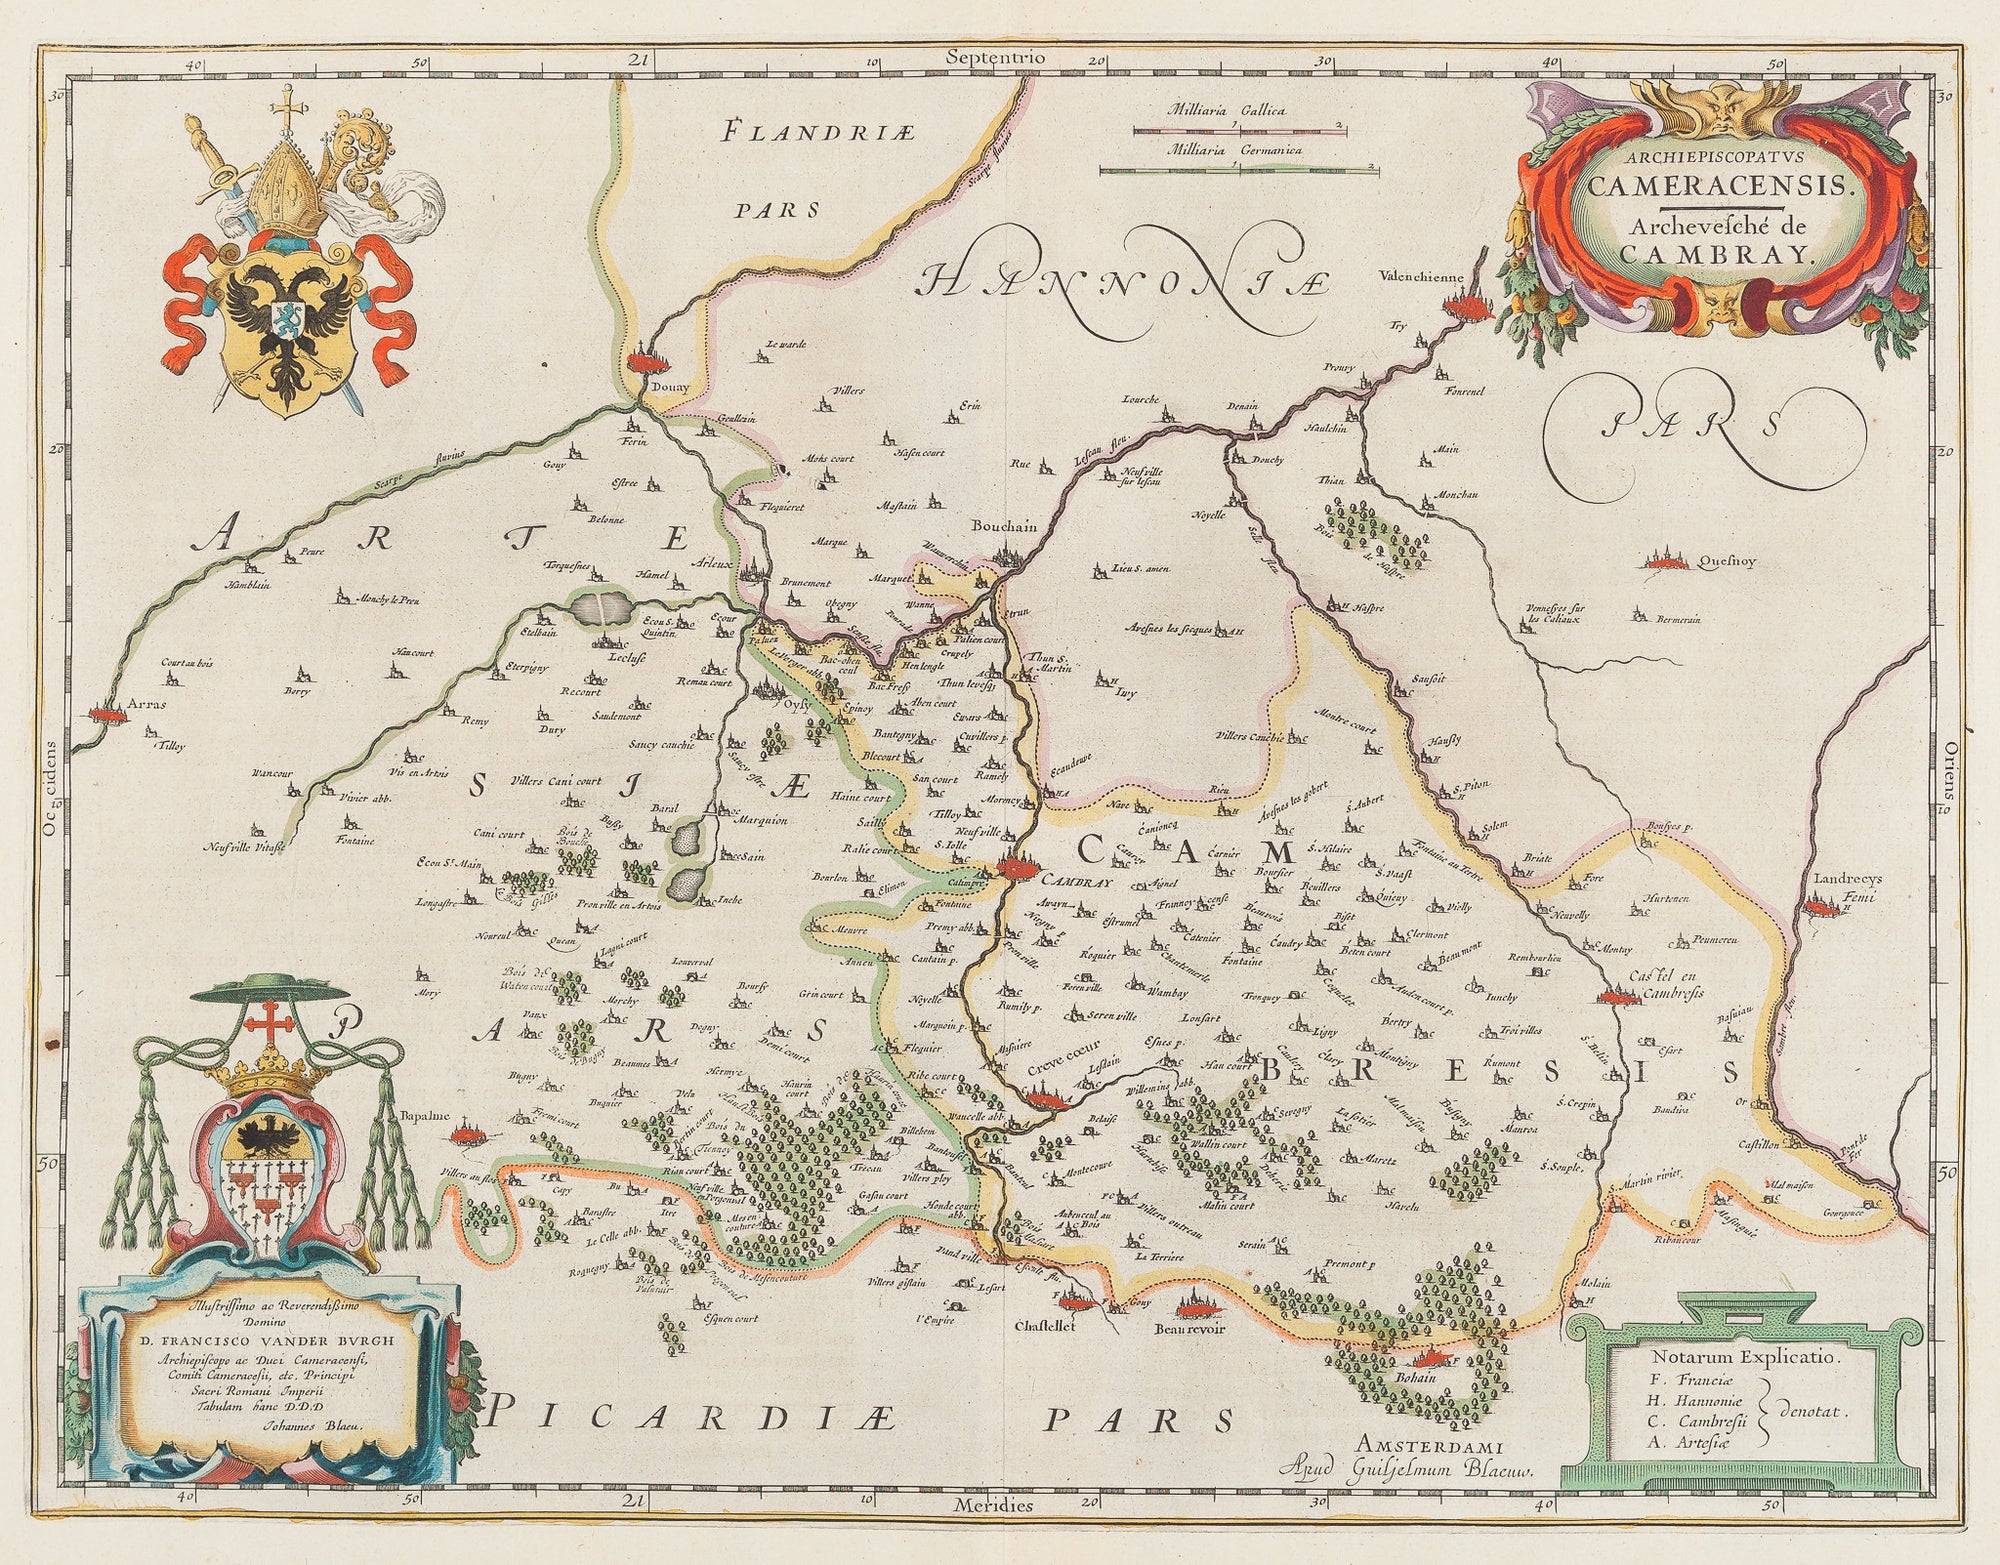 Antique print. Title: 'Archiepiscopatus Cameracensis. Archevesché de Cambray'. Contemporary handcoloured engraving , published by Blaeu in his " Toonneel des Aerdriicx, Ofte Nieuwe Atlas, Dat is Beschryving van alle Landen. Amsterdam, 1642. It shows the region in the north of France with places like: Crevecoeur, Valenchienne, Arras, etc.